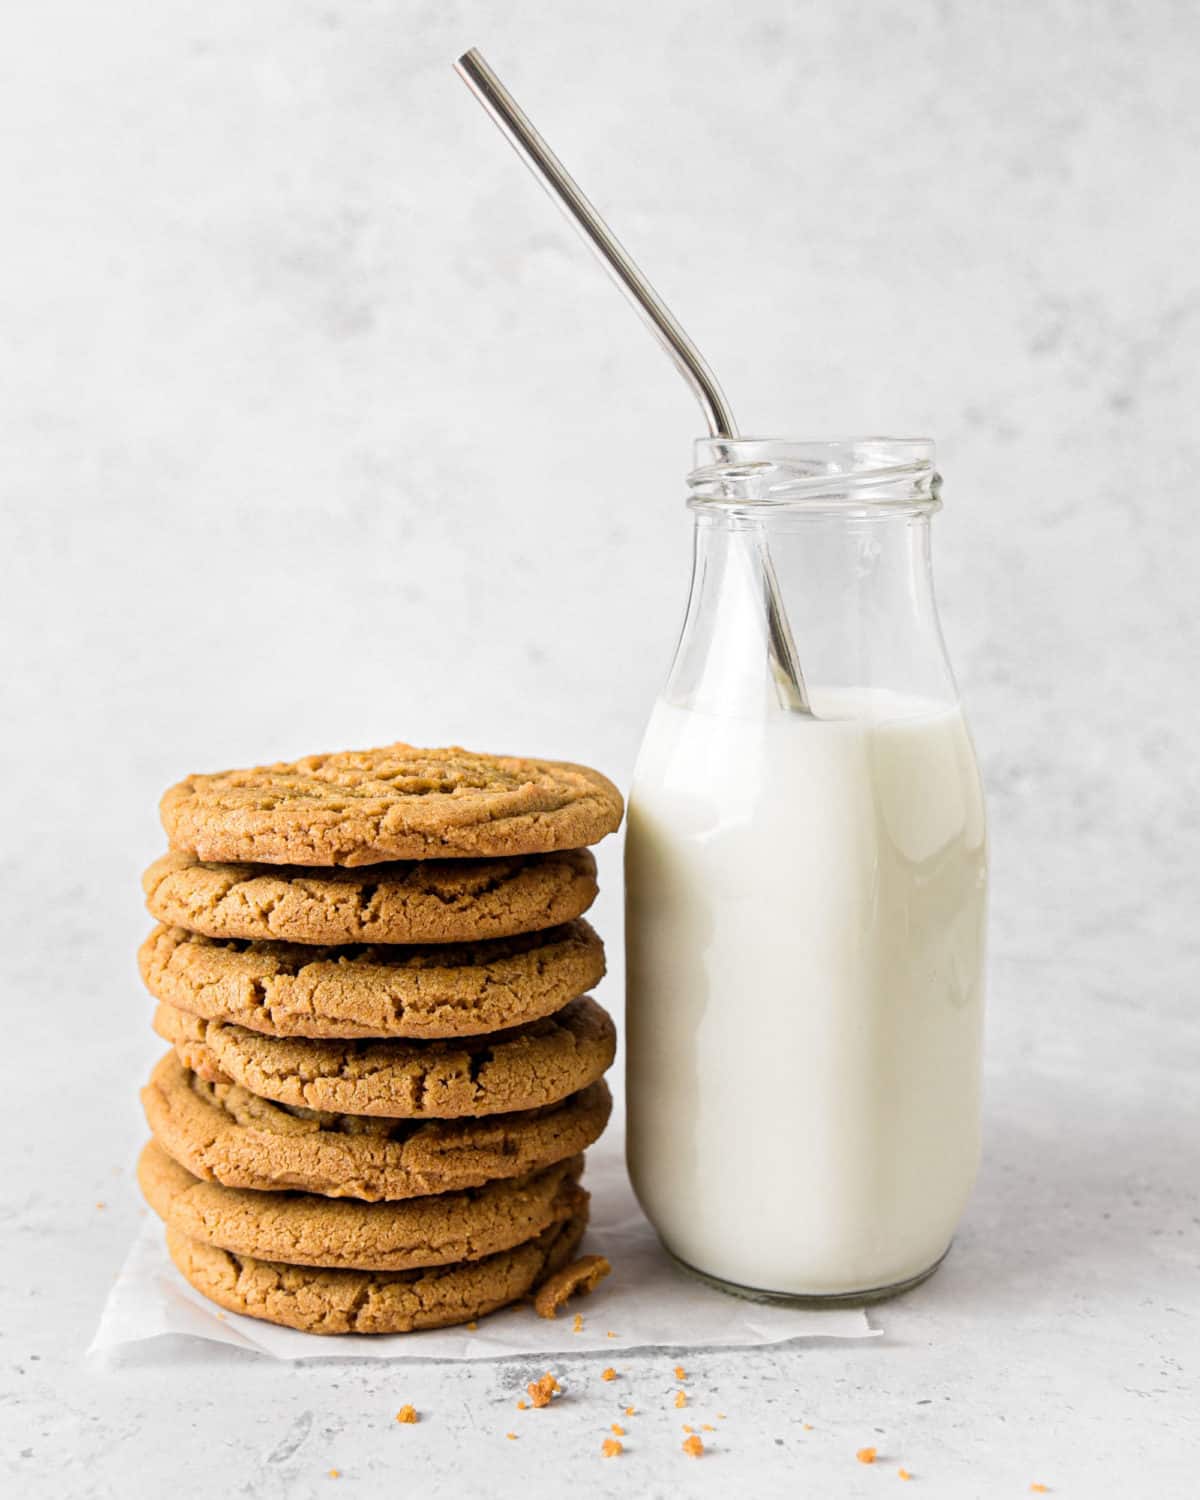 A stack of Biscoff butter cookies next to a glass jug of milk.